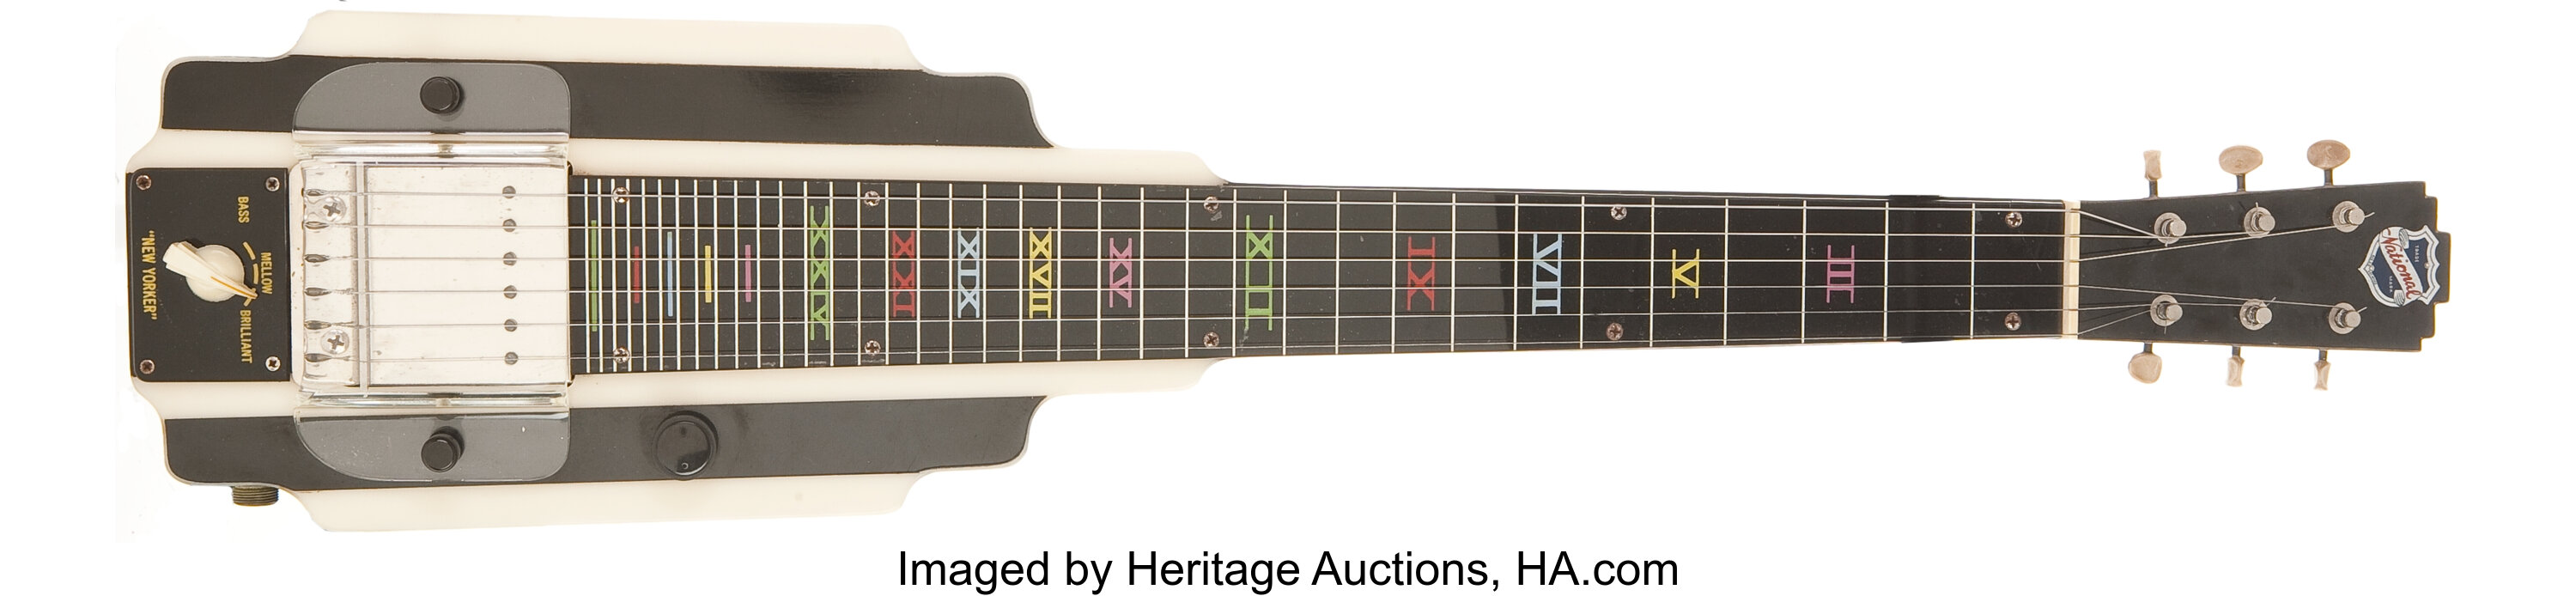 Heritage Auctions Search, Vintage Guitars & Musical Instruments